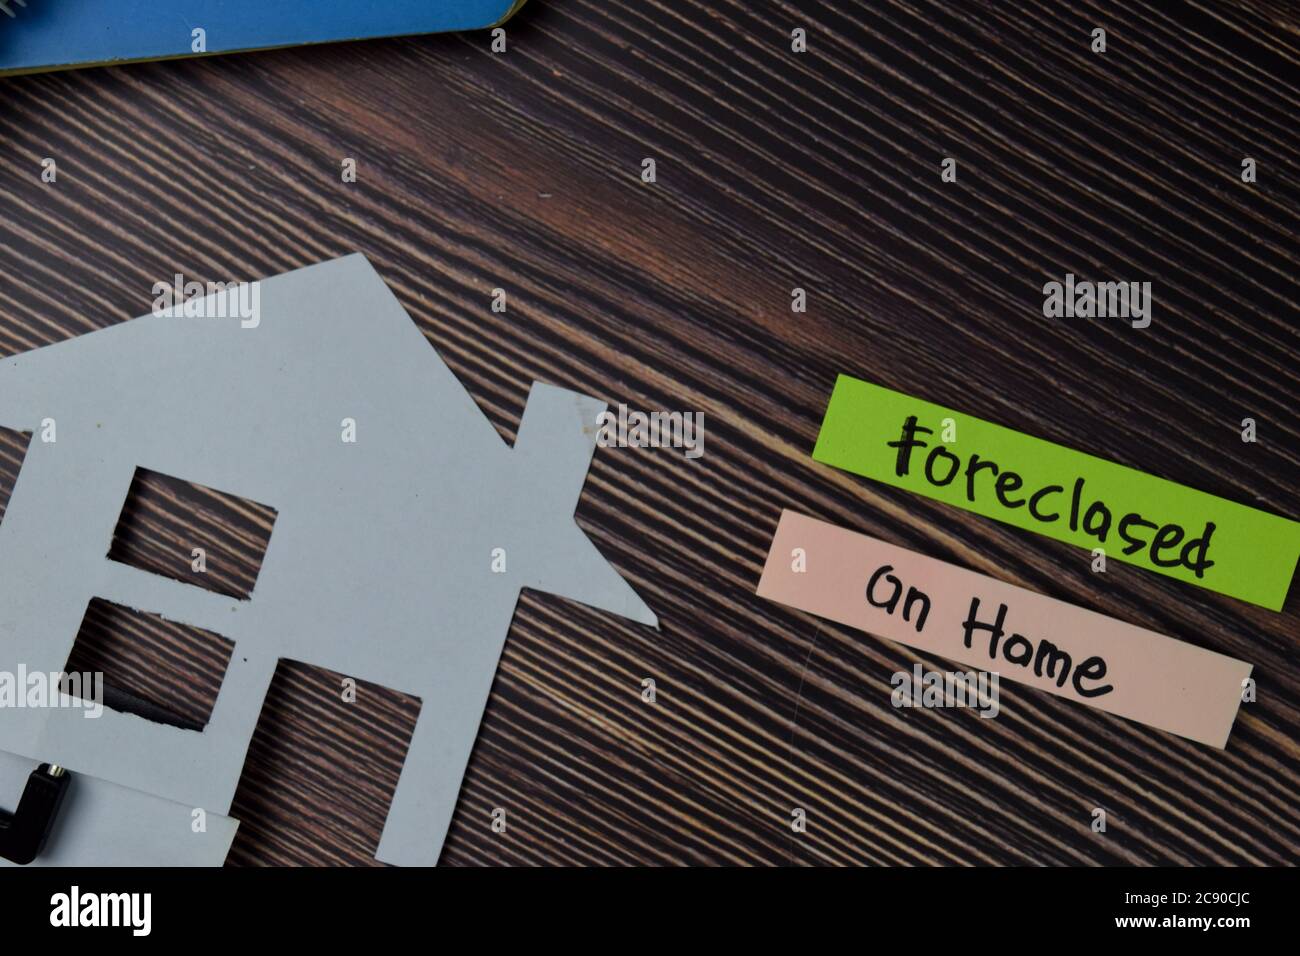 Foreclosed on Home text write on sticky notes isolated on office desk. Stock Photo